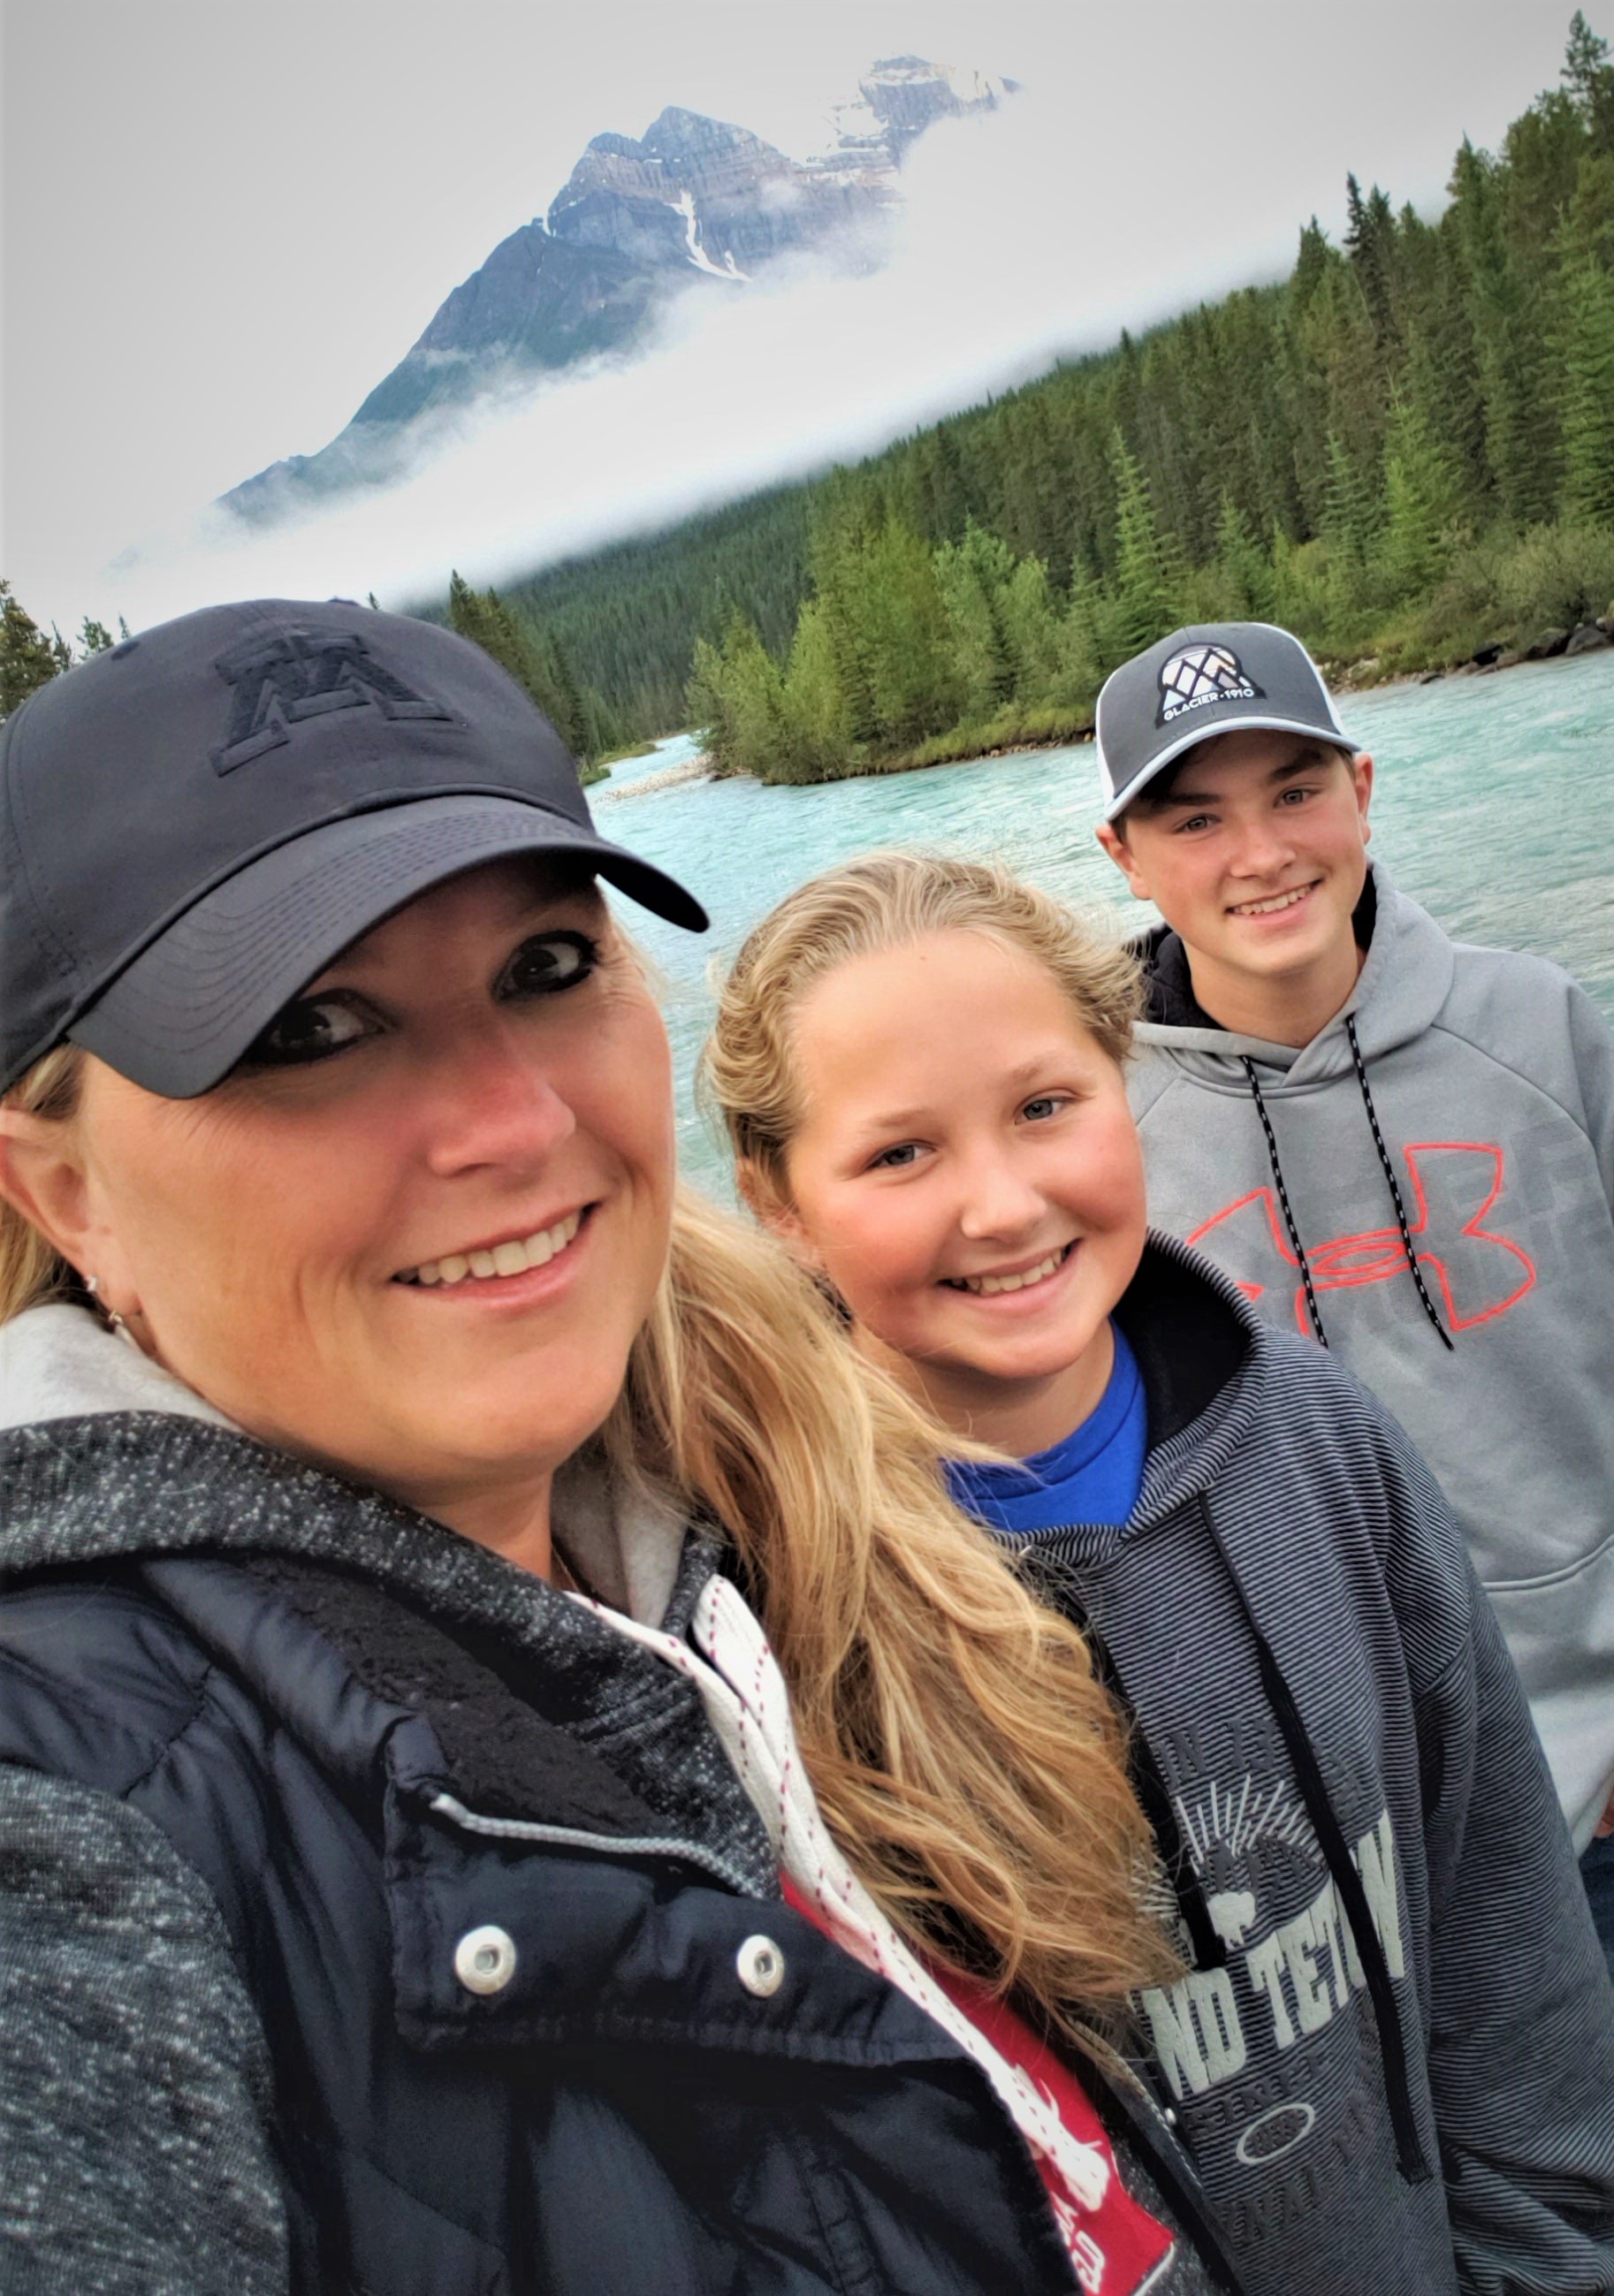 Shannon and her kids Caleb and Jaiden on vacation camping in Banff National Park